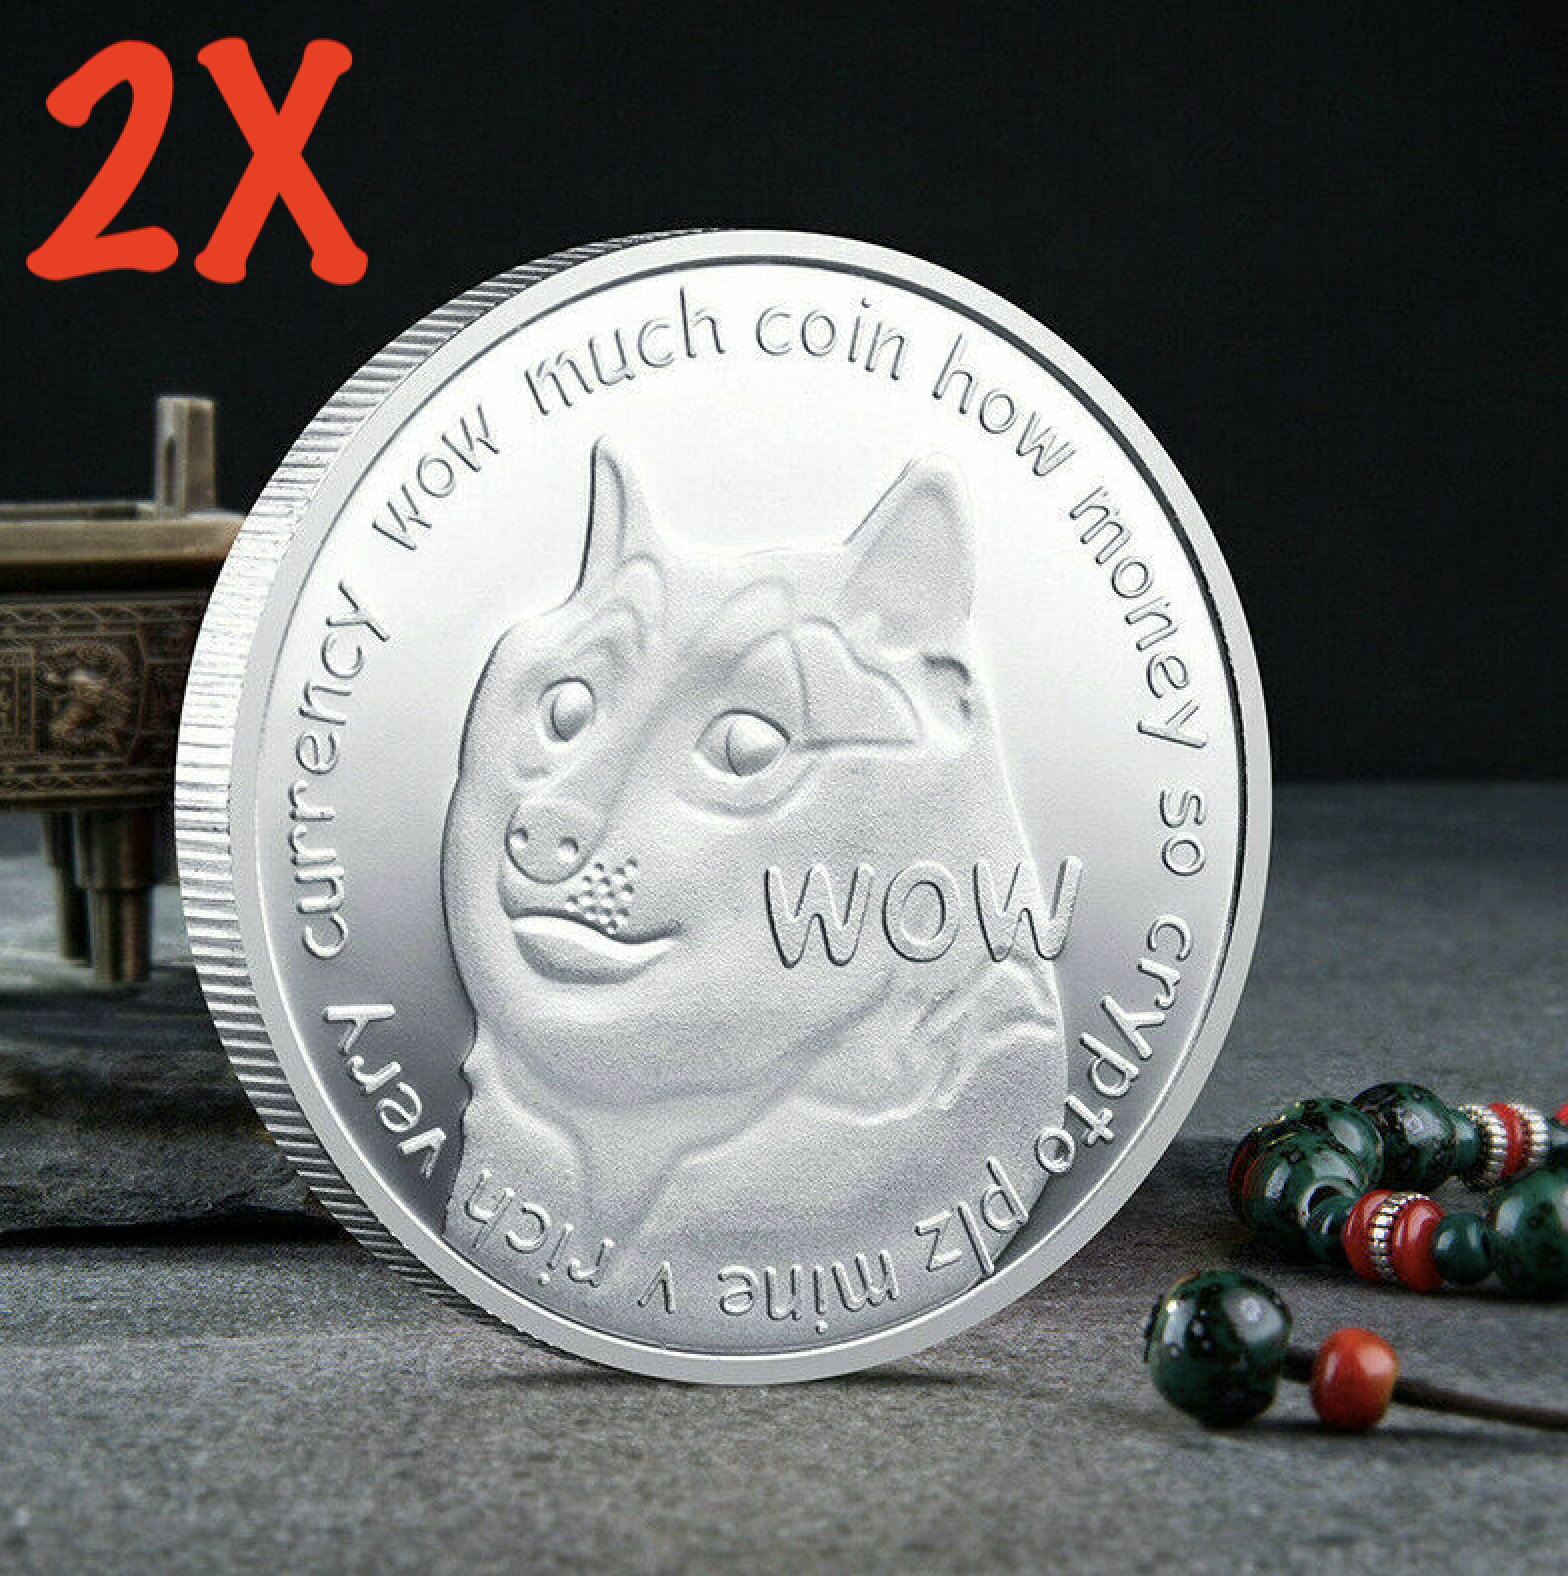 2x DogeCoin - Doge Coin - CryptoCurrency Physical Silver Plated Coin - Shiba Inu